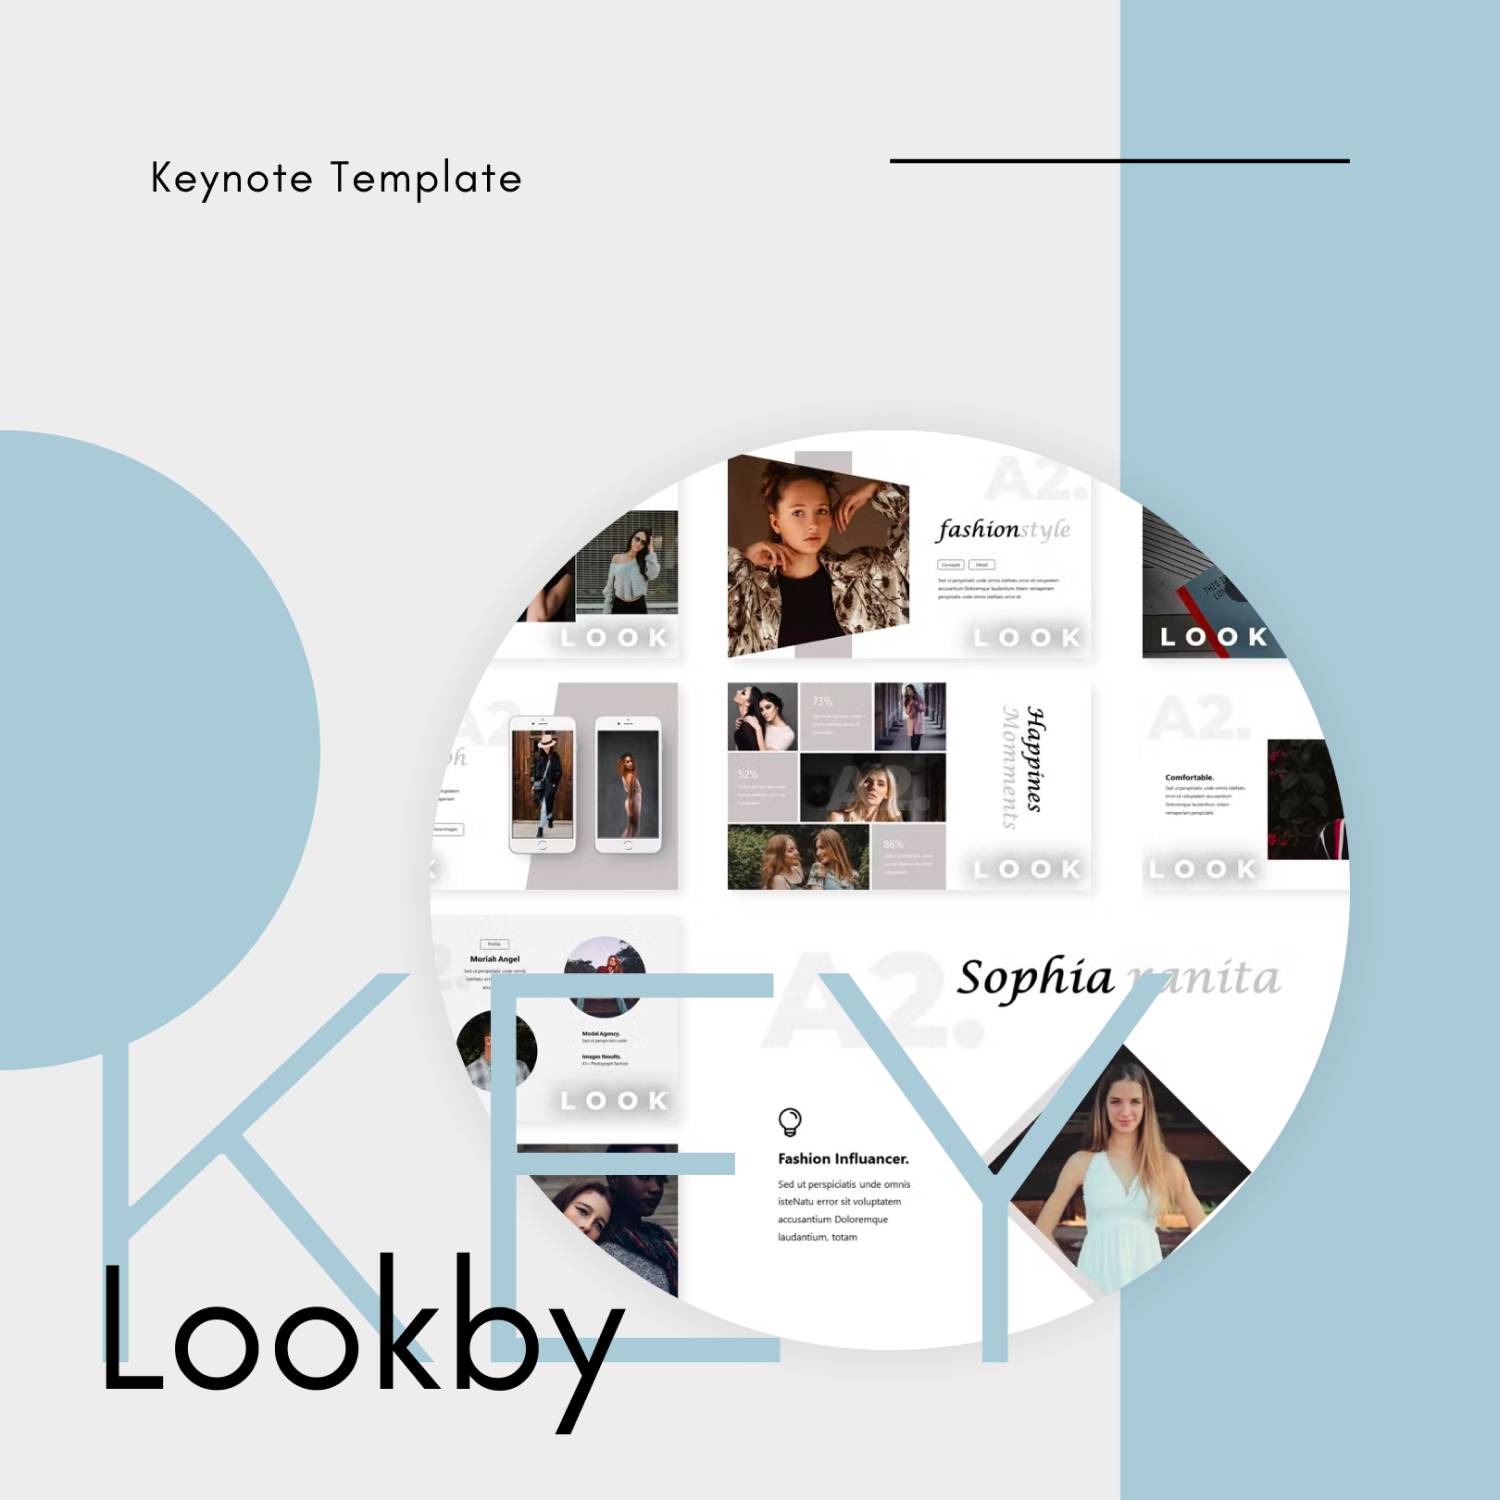 Preview images lookby keynote template.